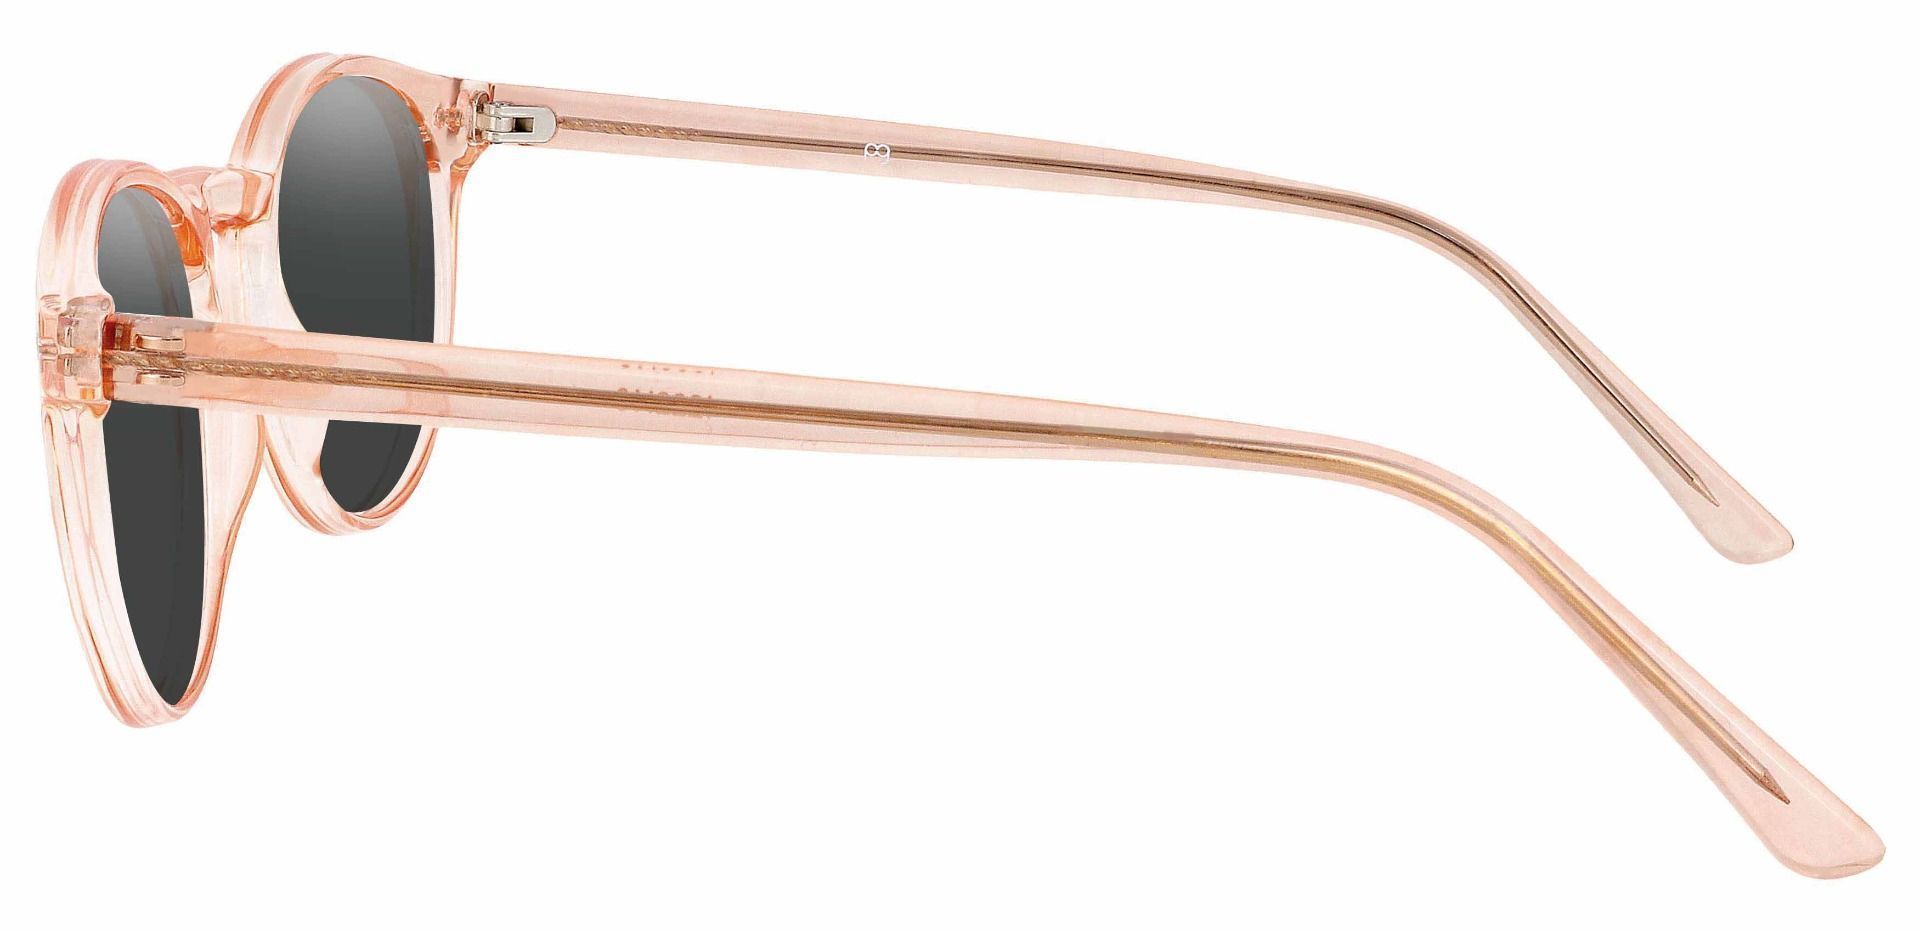 Harmony Oval Prescription Sunglasses - Pink Frame With Gray Lenses